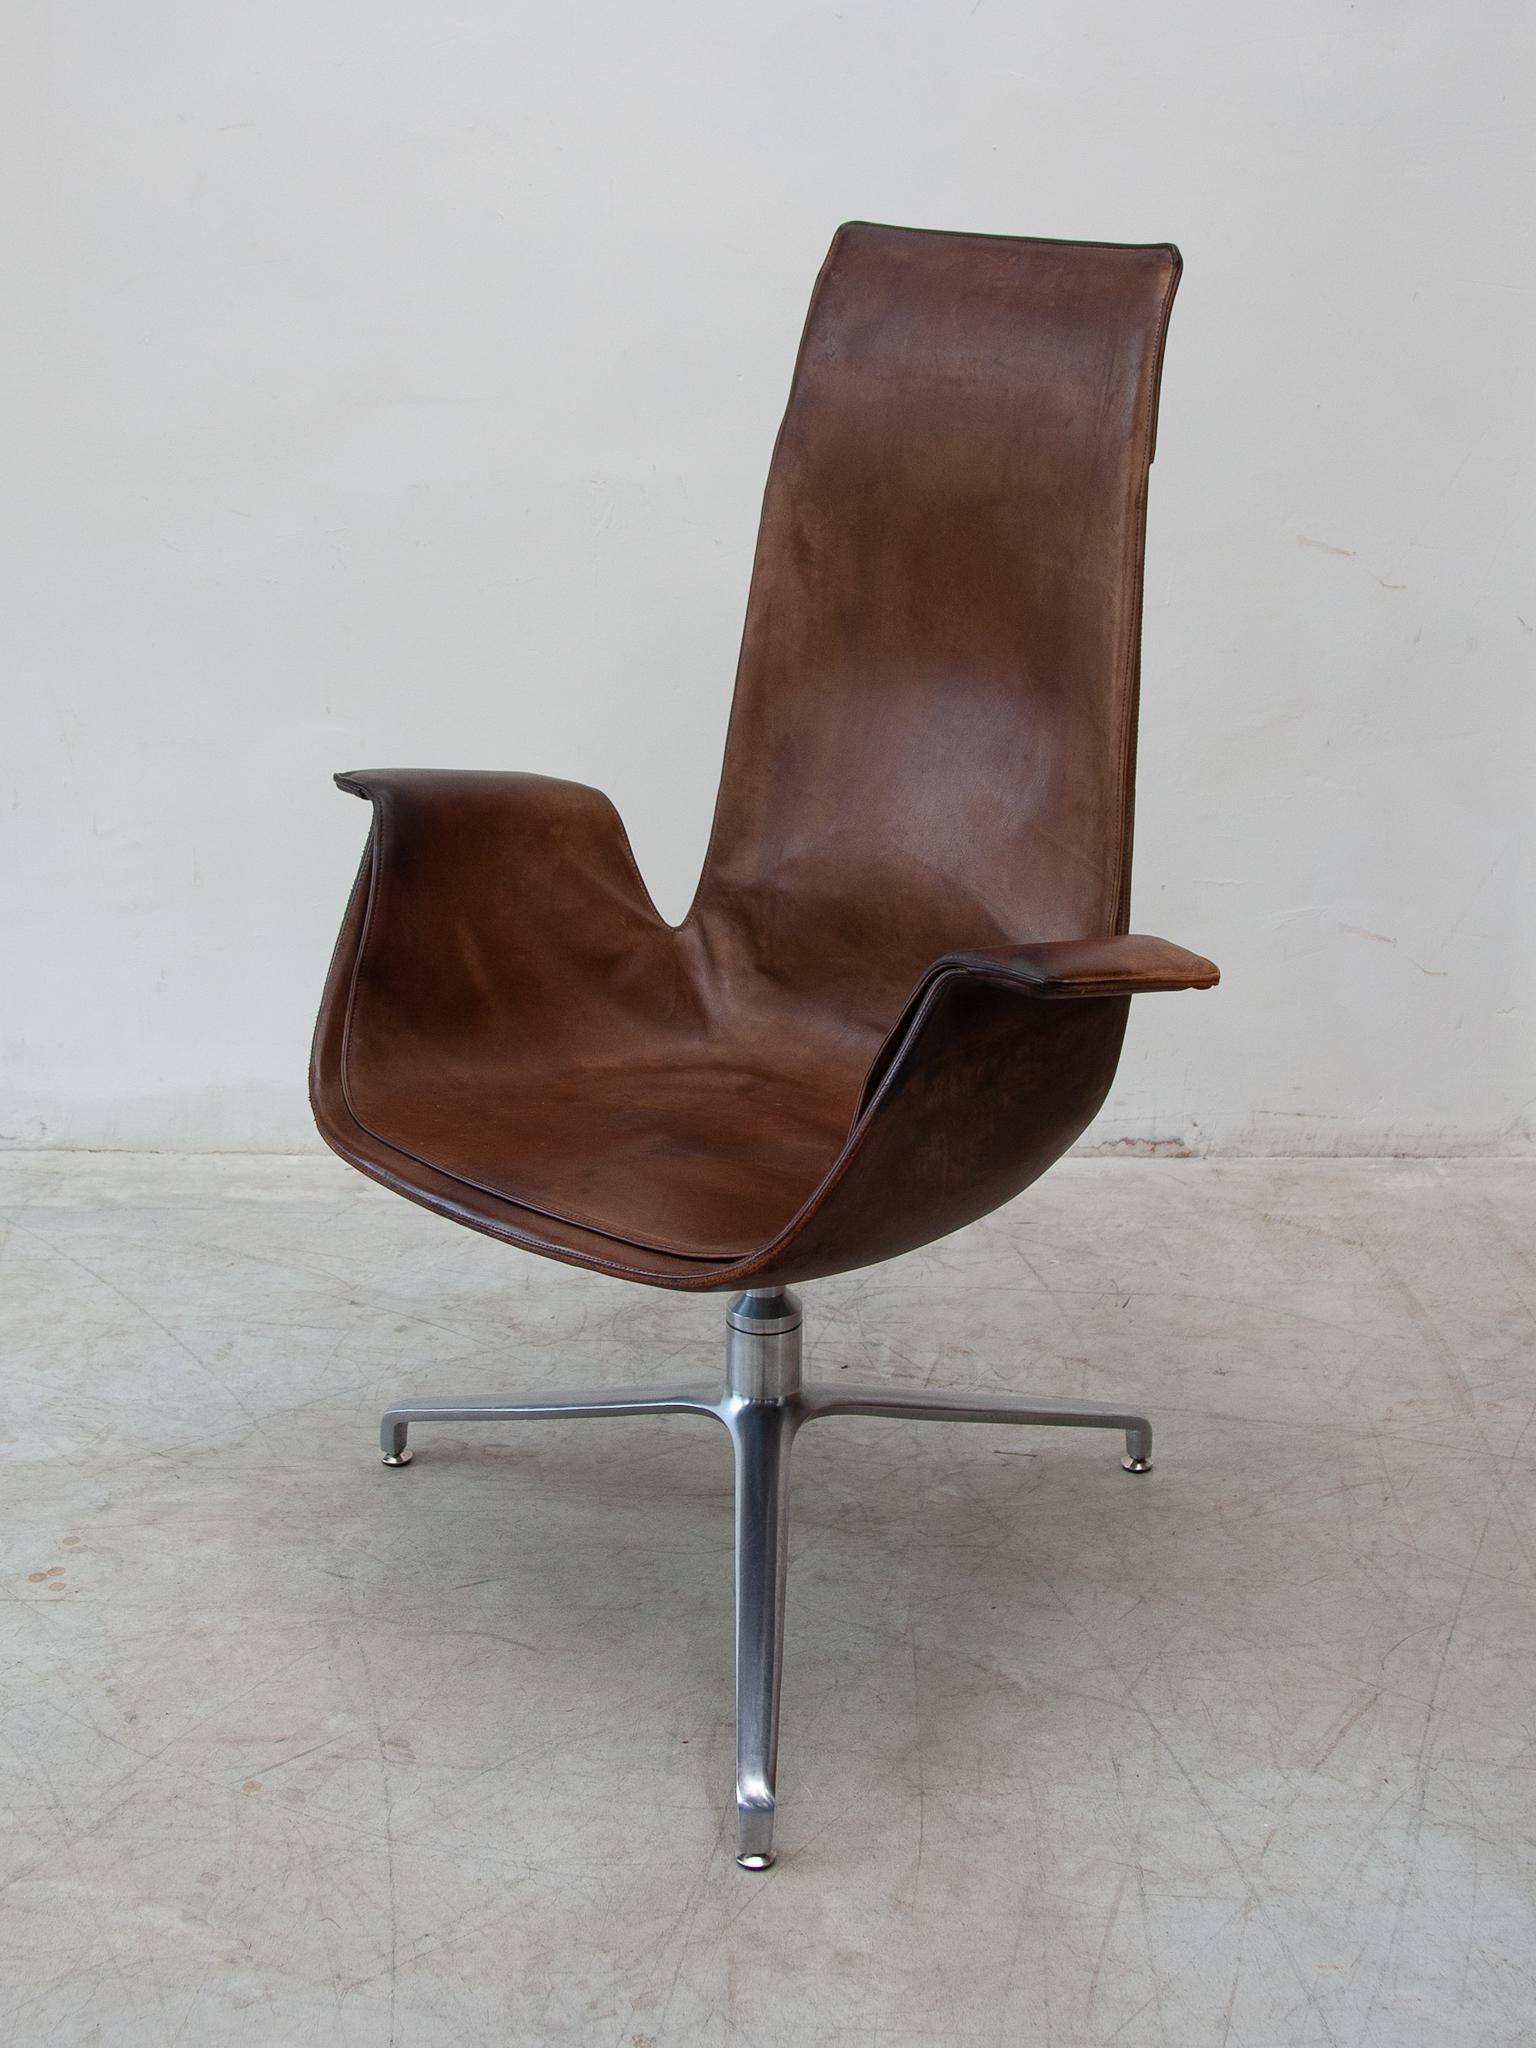 Fabricius & Kastholm FK6725 Desk, Lounge Chair in Brown Leather, Kill In Good Condition For Sale In Antwerp, BE